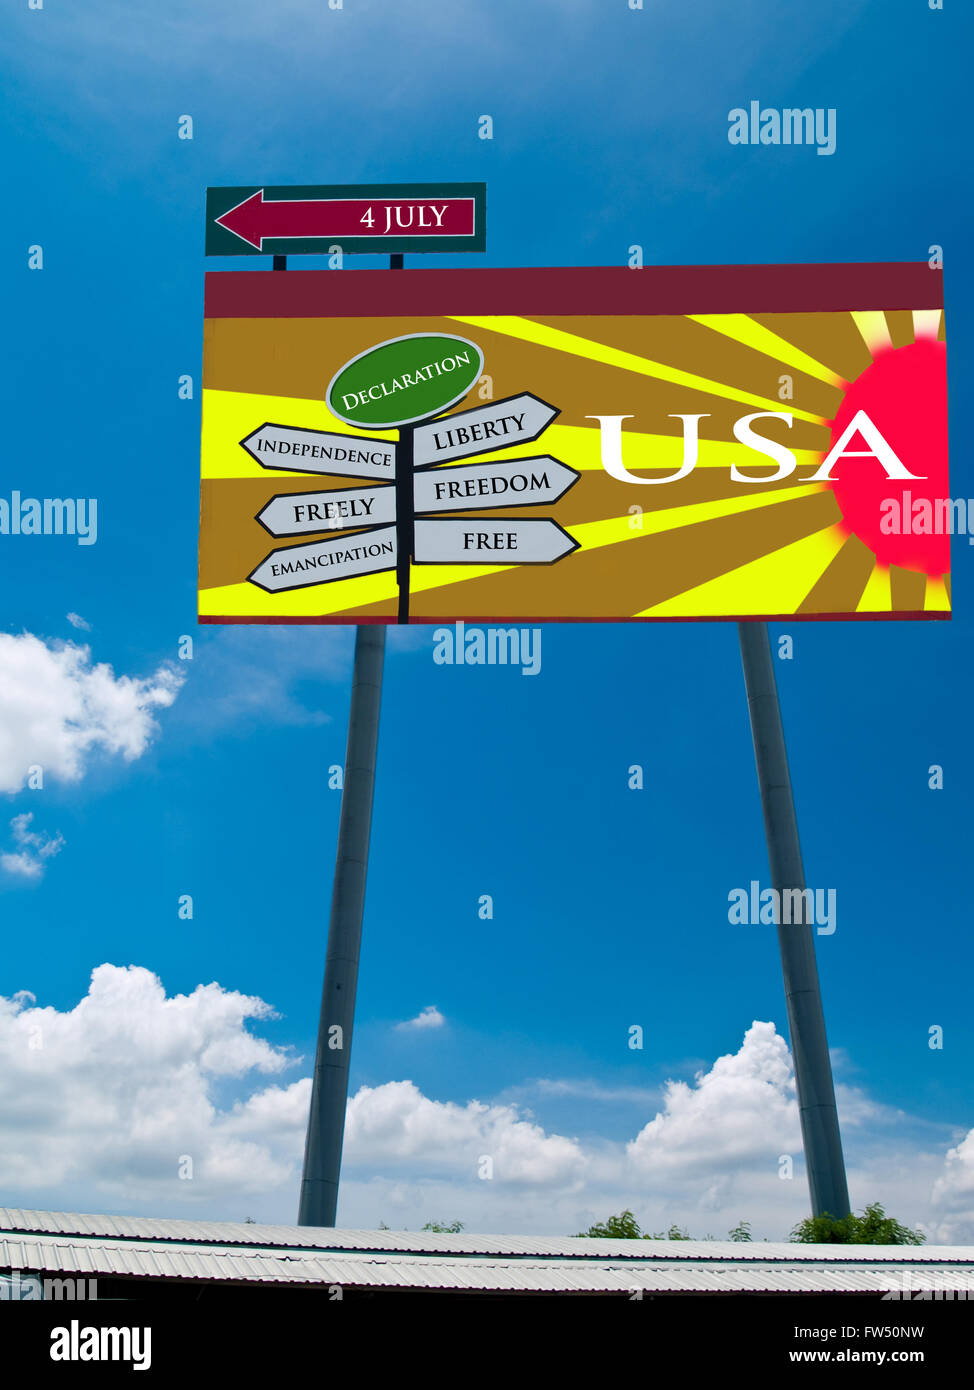 The fourth of July independence day billboard Stock Photo